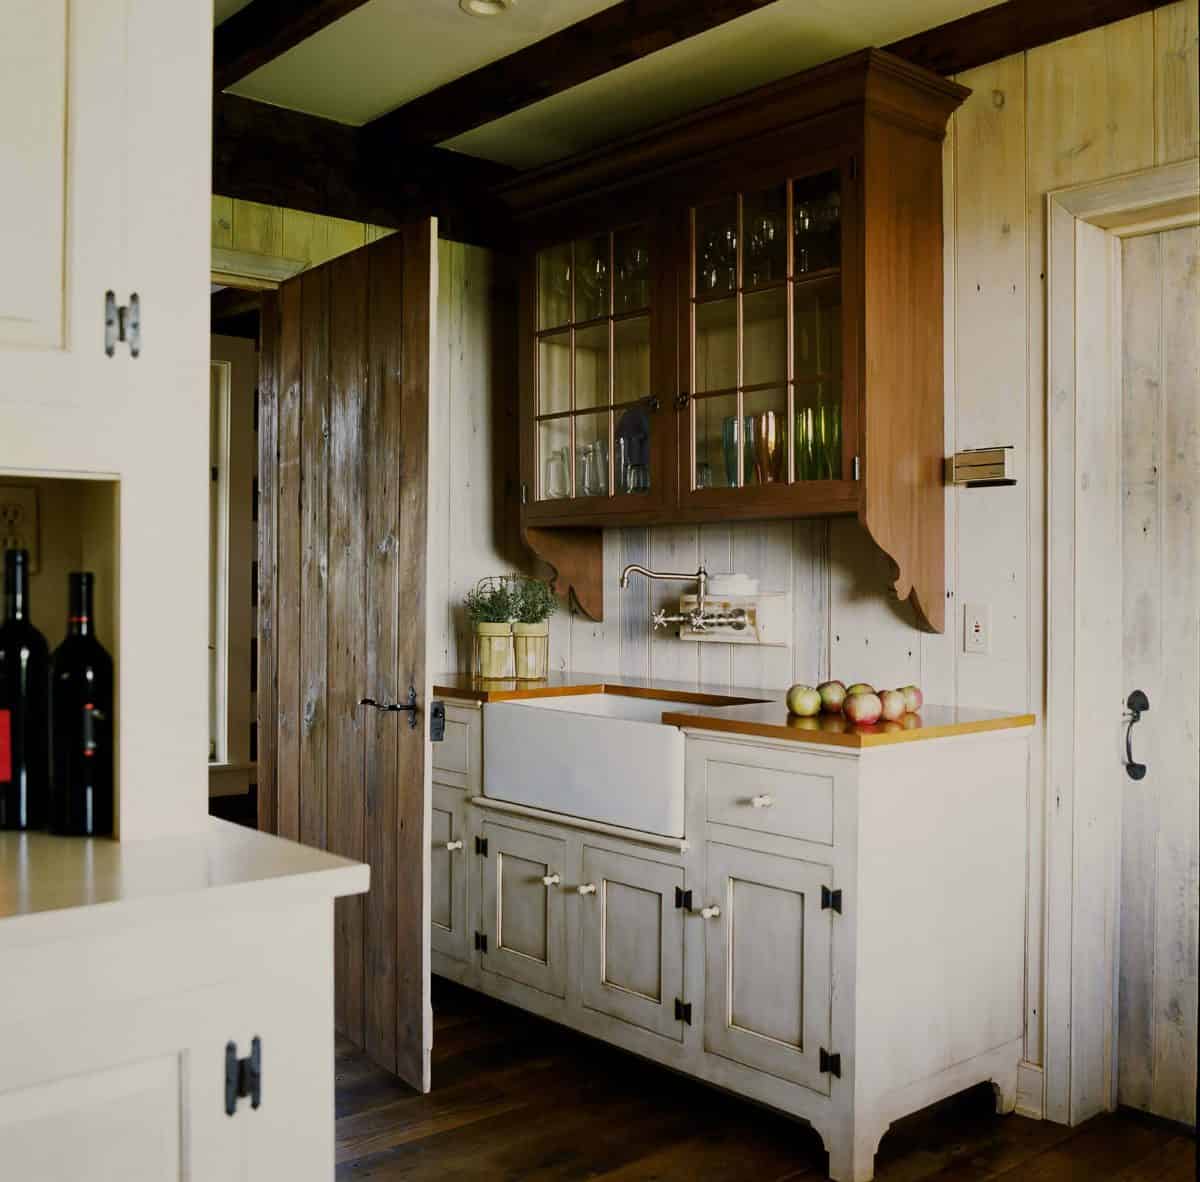 Best Ideas Of Rustic Kitchen Cabinet You Ll Want To Copy